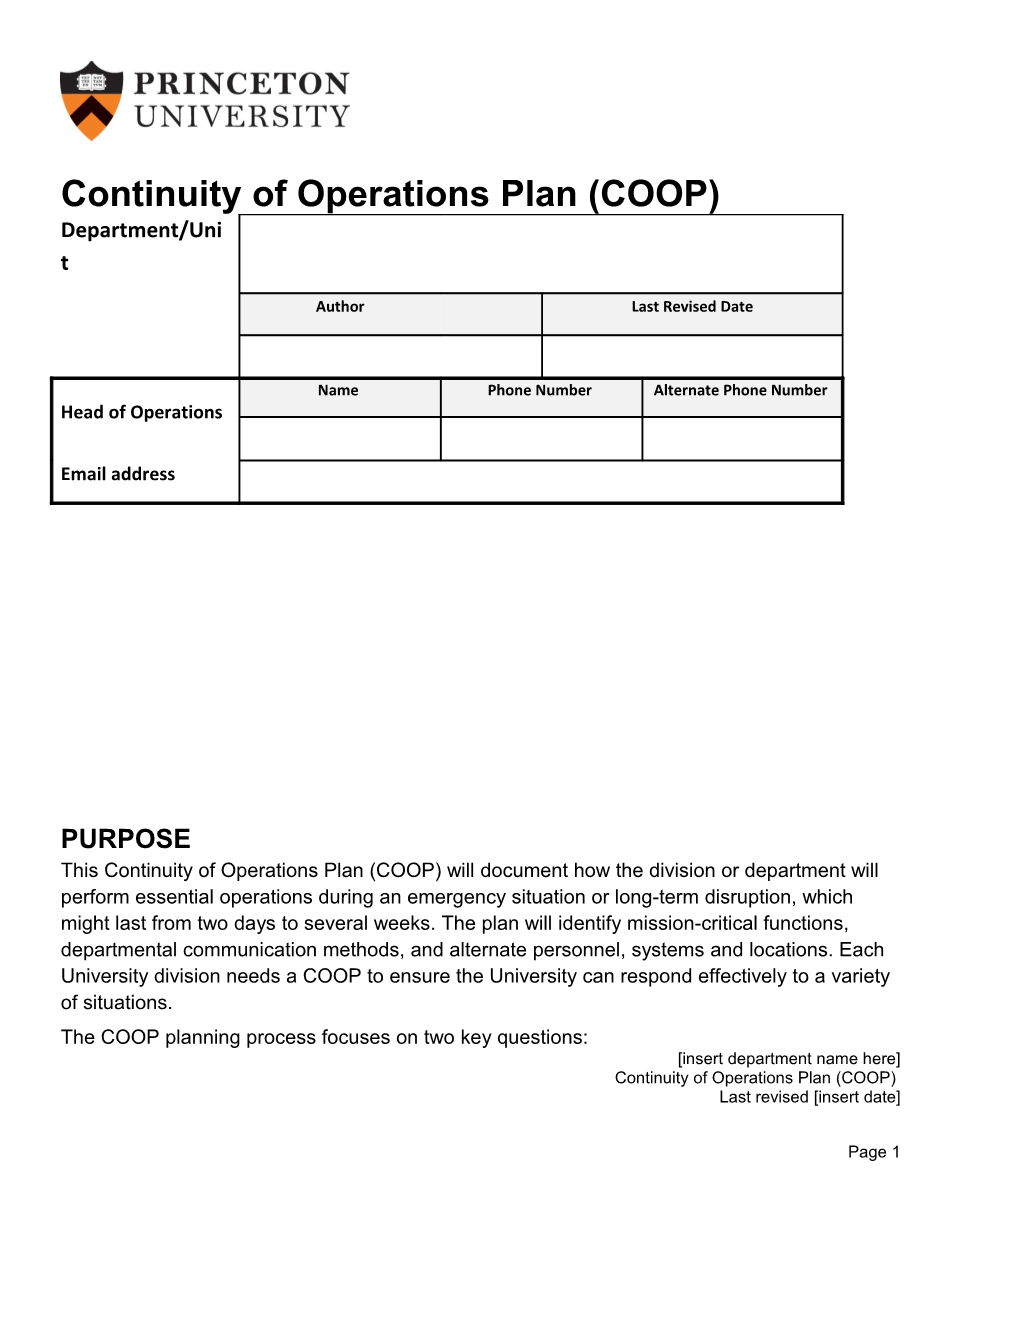 The COOP Planning Process Focuses on Two Key Questions